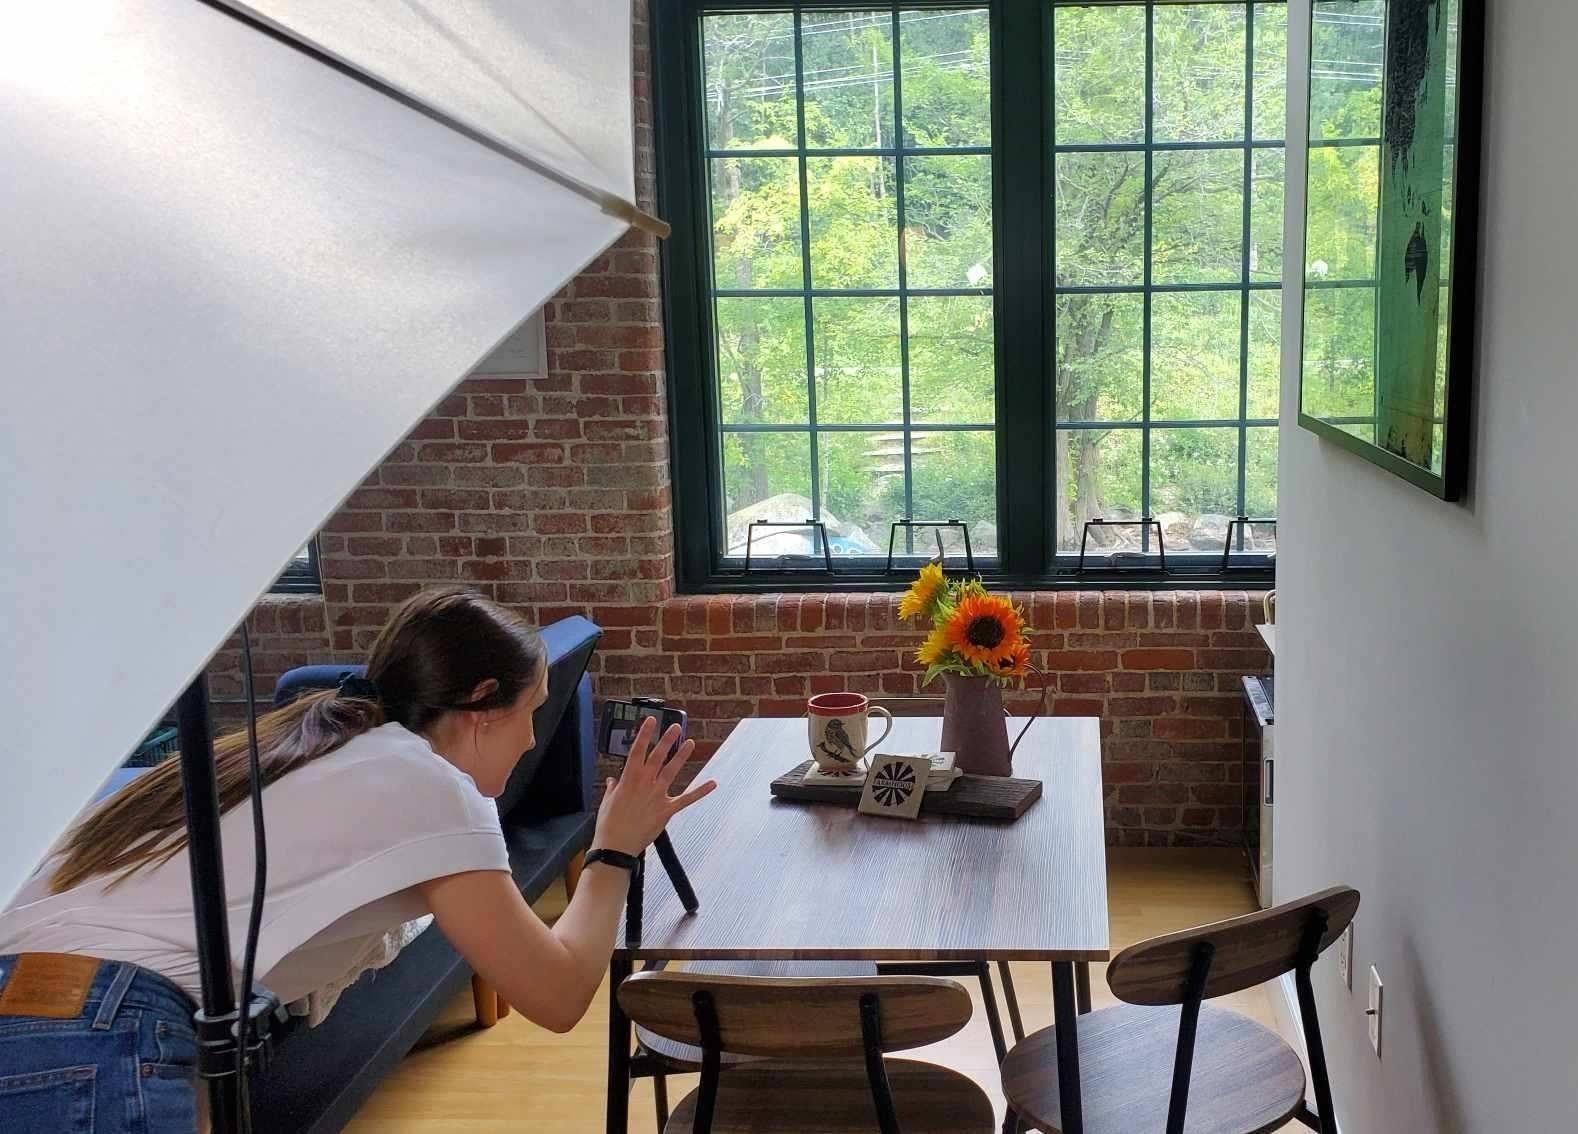 Behind the Scenes: A Photoshoot with A Rustic Feeling - A Rustic Feeling